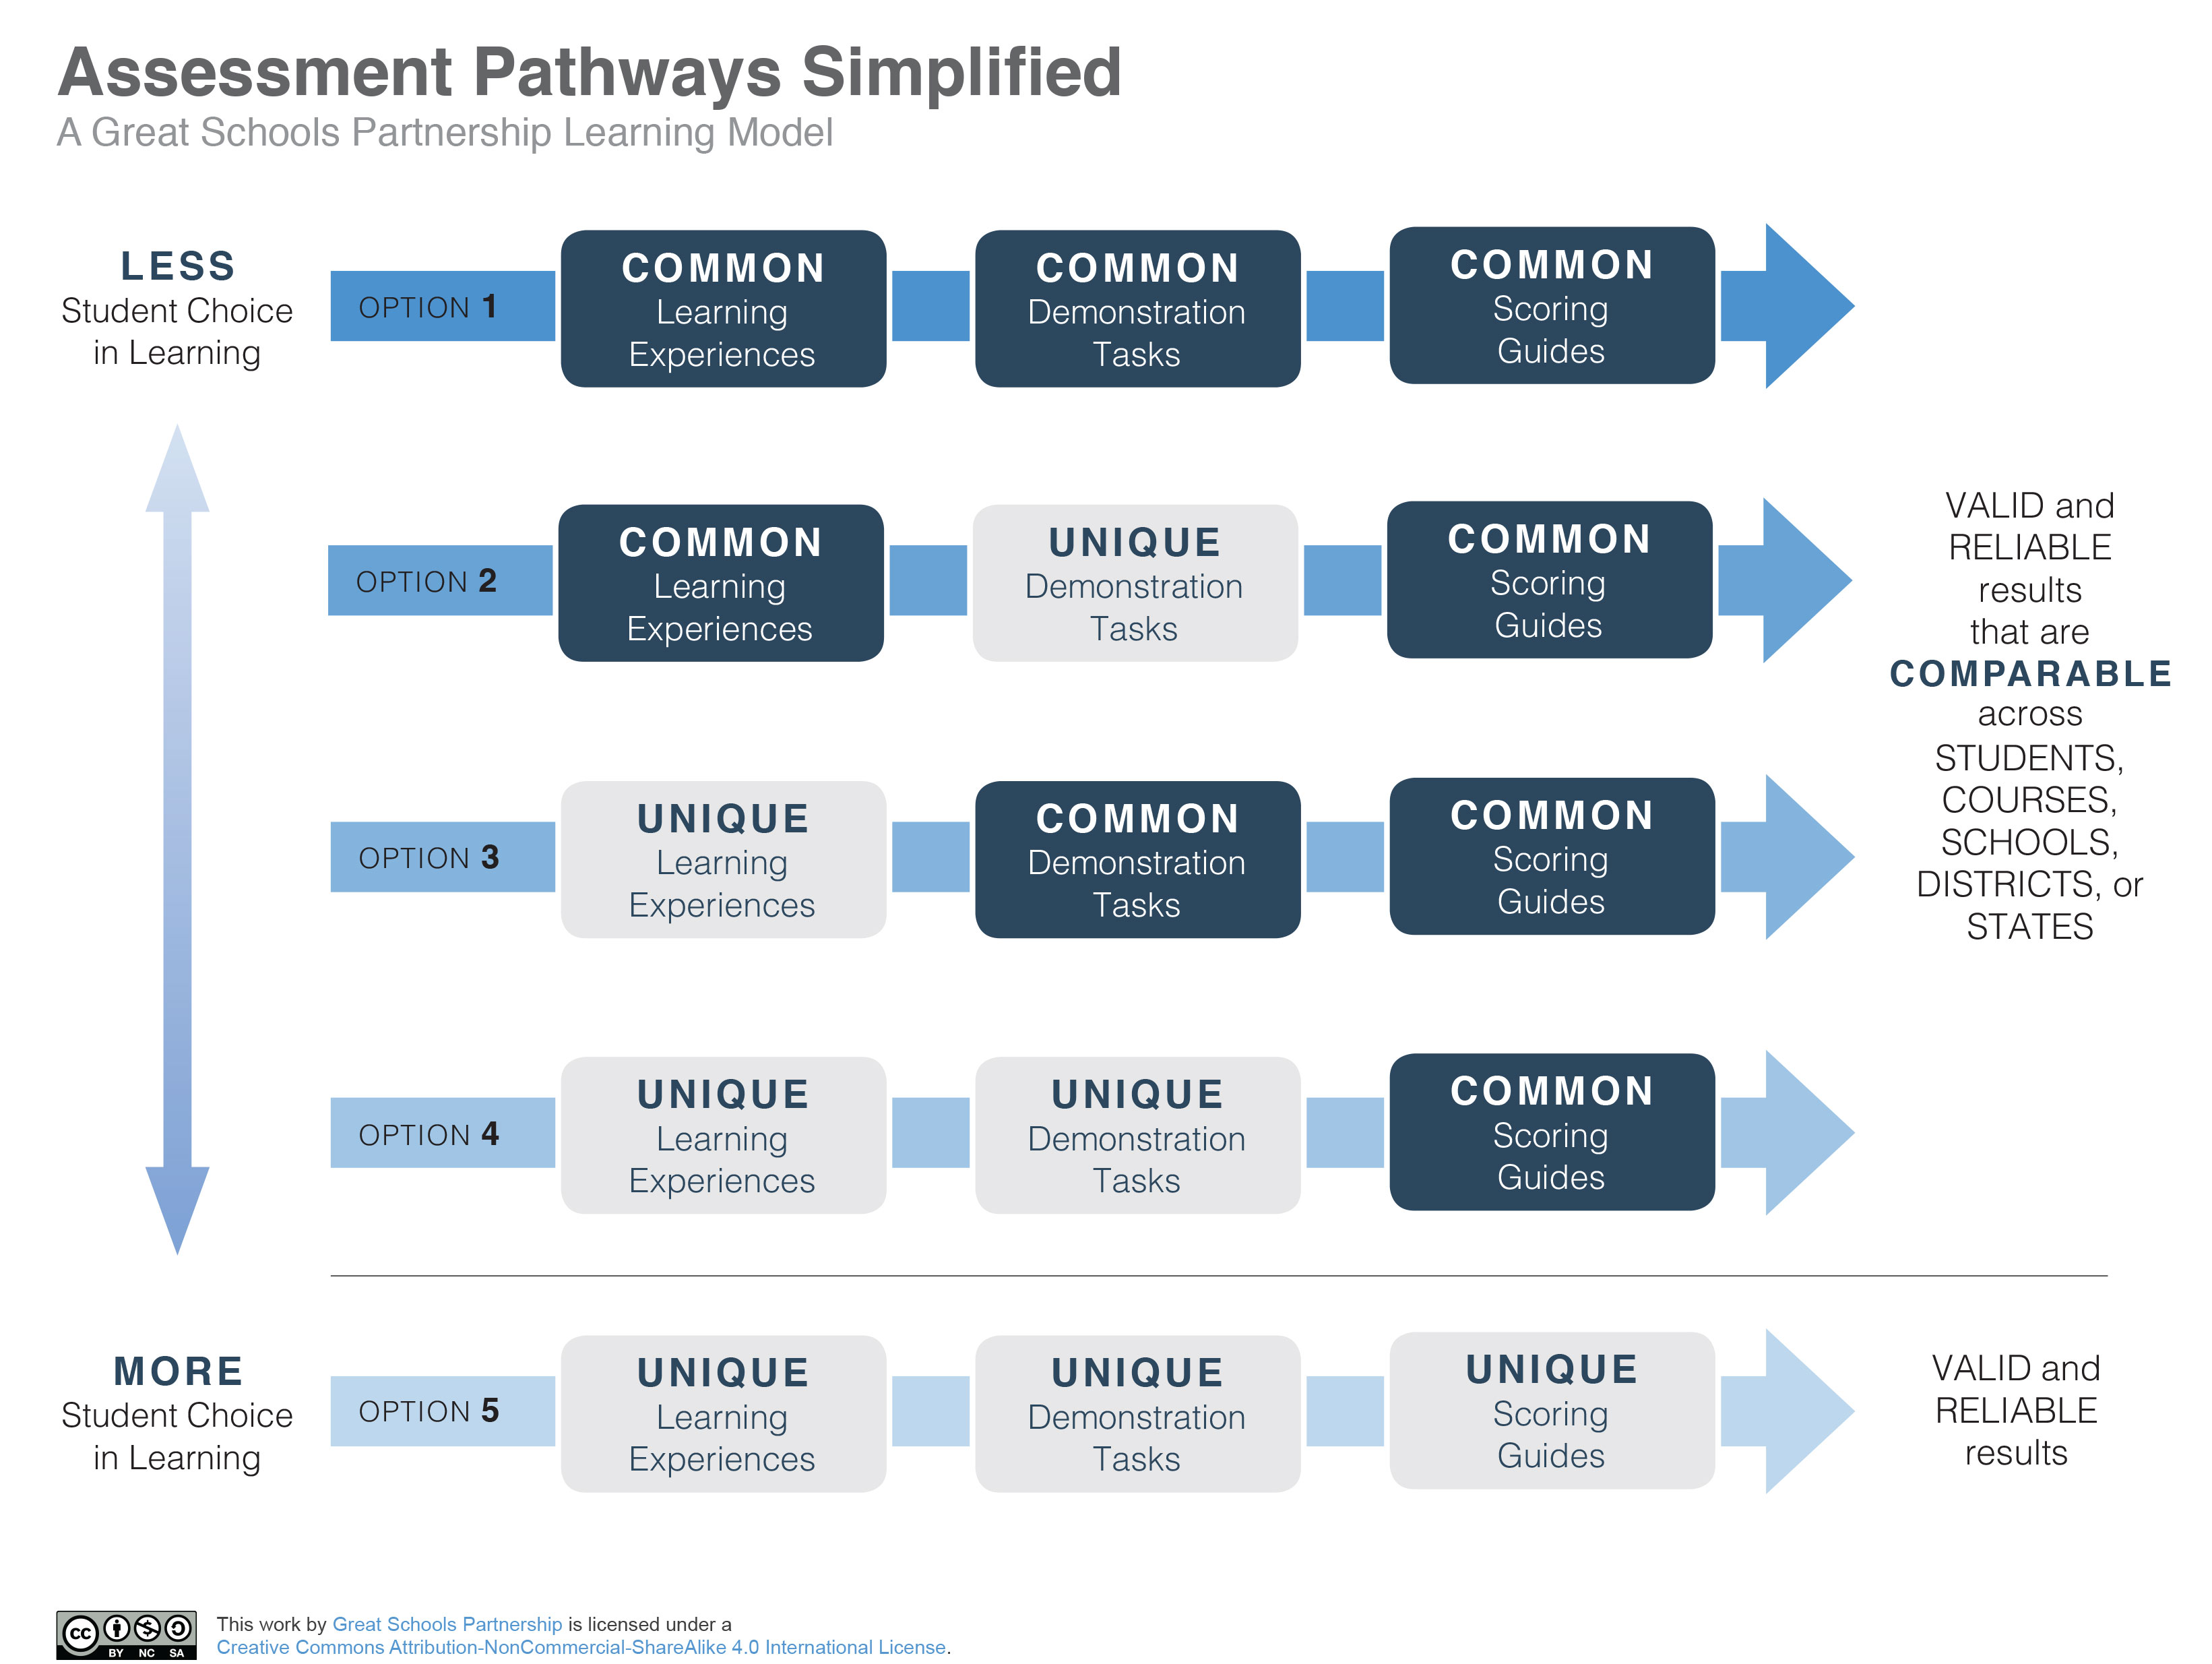 Assessment Pathways Simplified